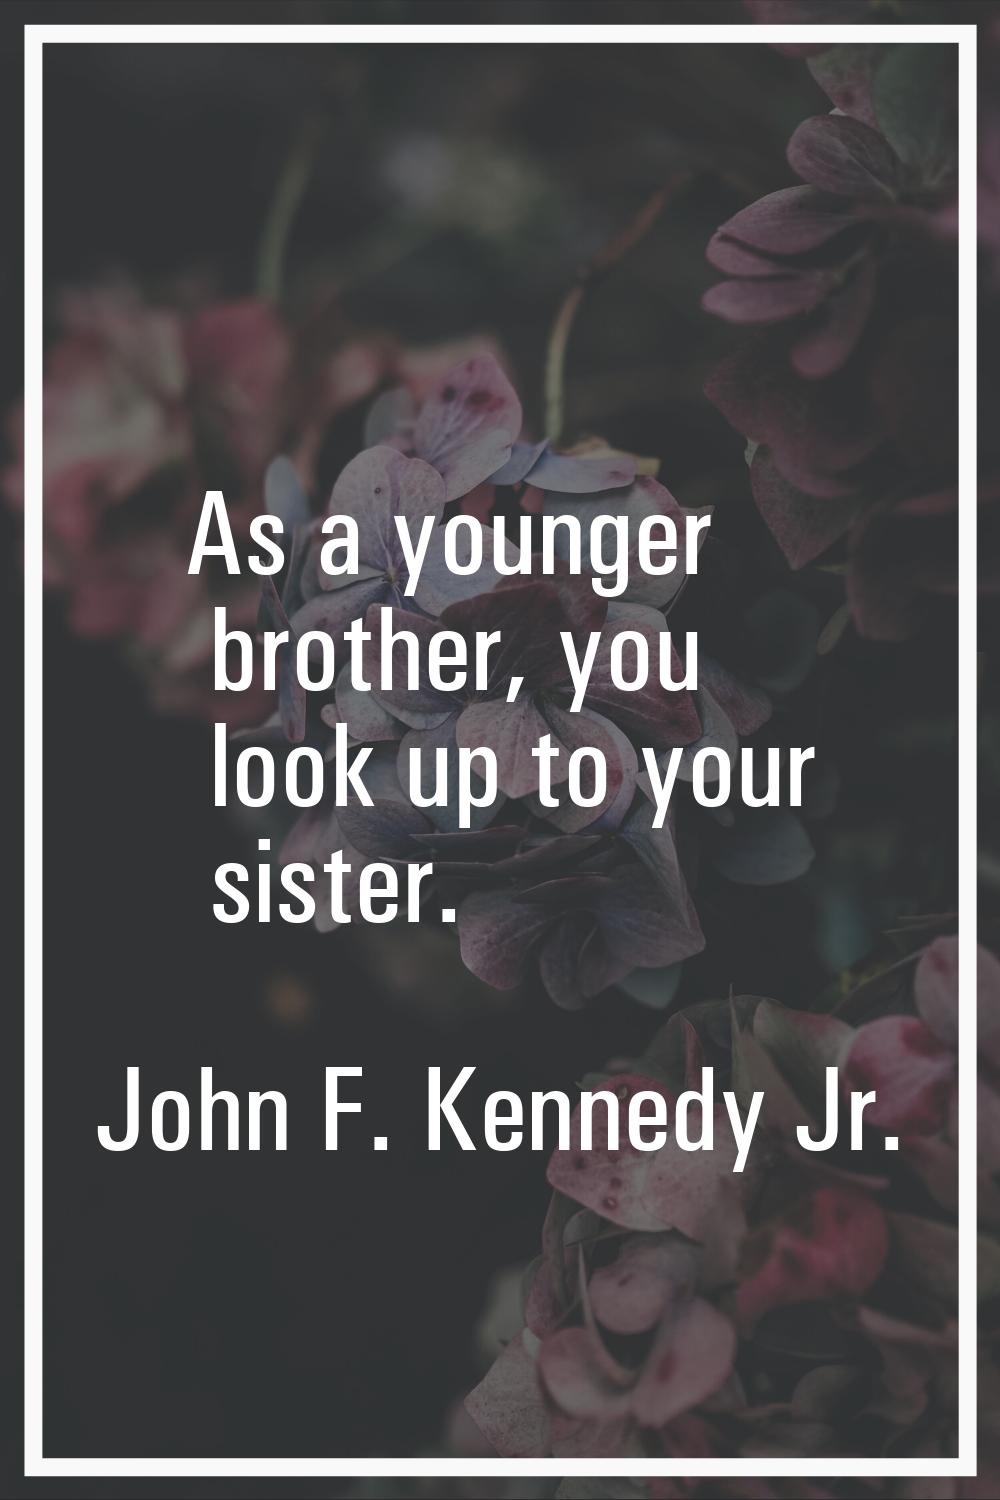 As a younger brother, you look up to your sister.